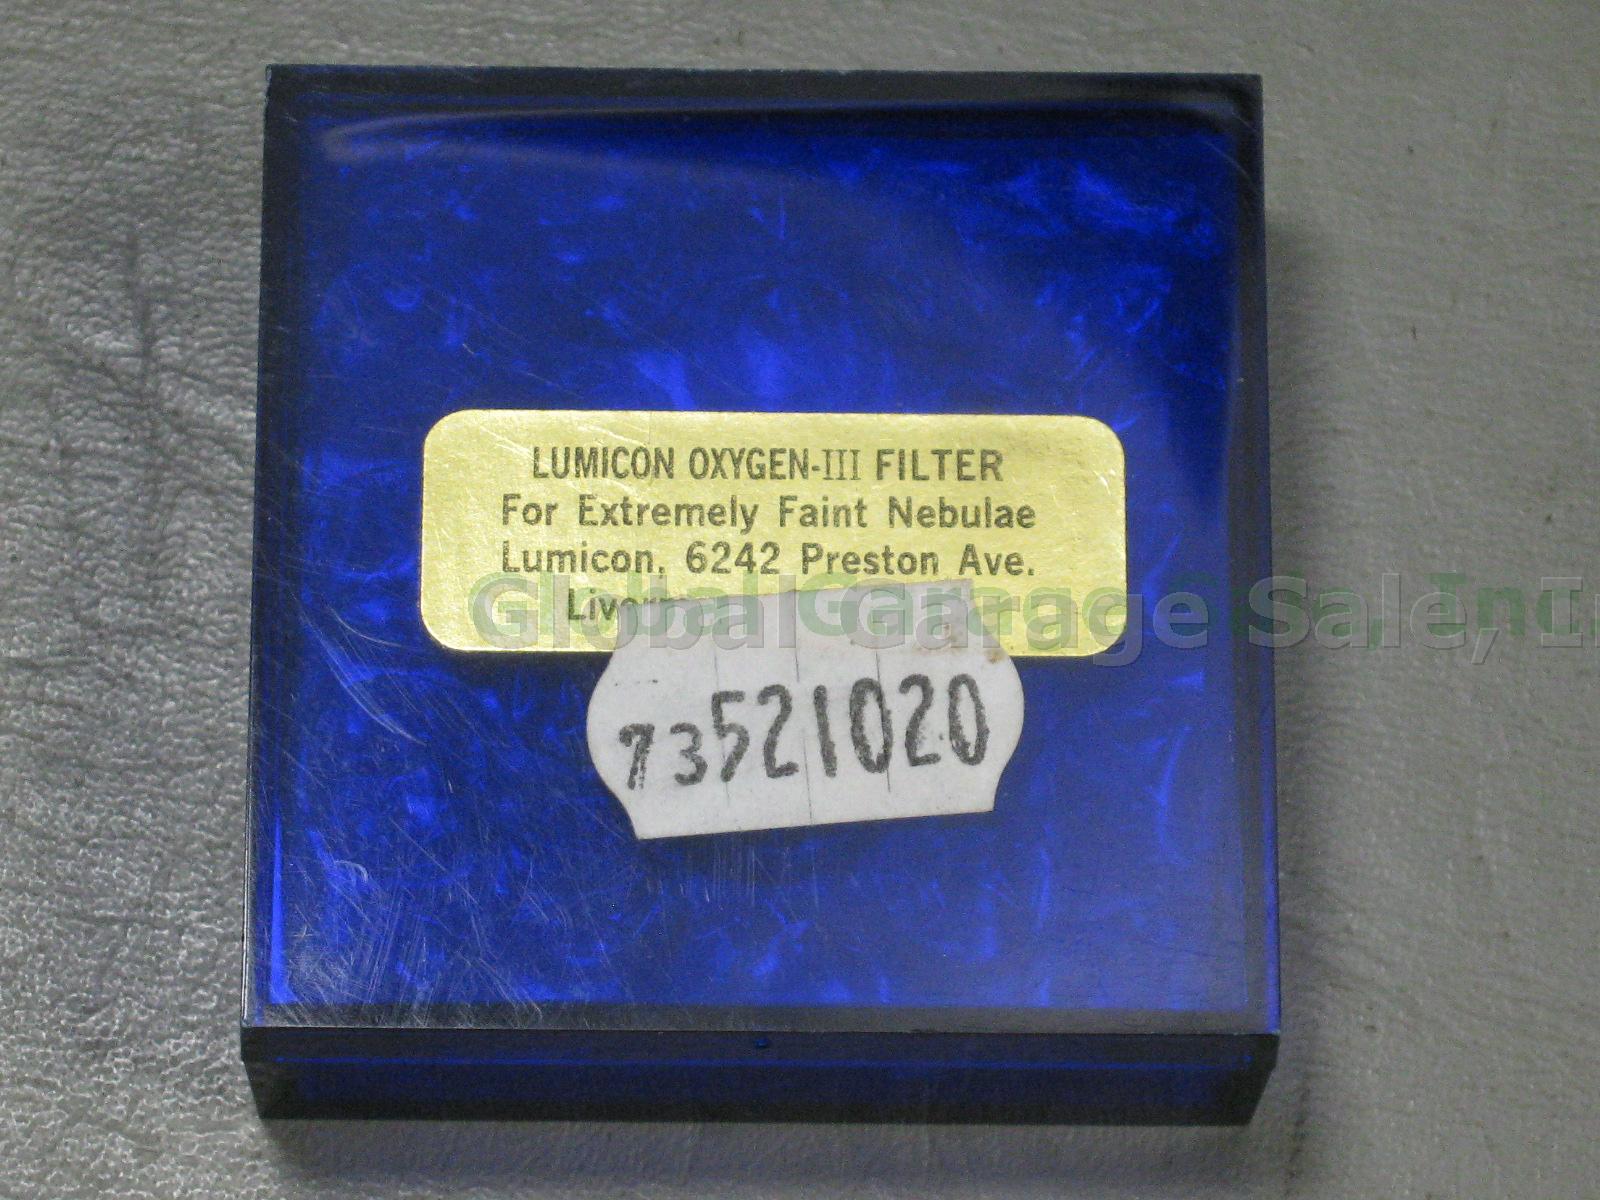 Never Used! Lumicon 1.25" Oxygen-III Telescope Filter For Faint Nebulae No Res! 3